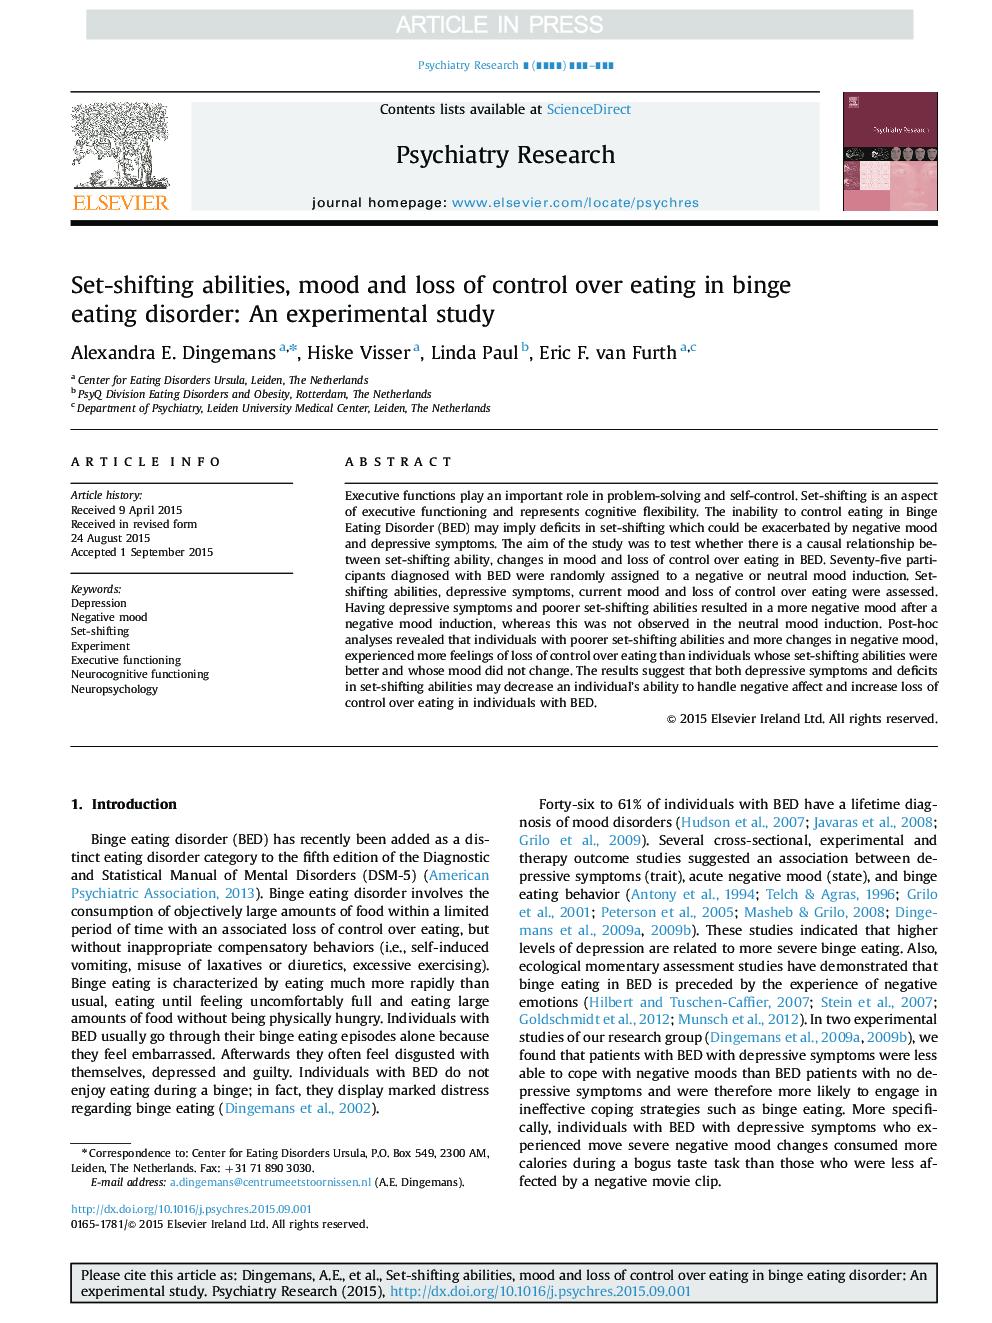 Set-shifting abilities, mood and loss of control over eating in binge eating disorder: An experimental study